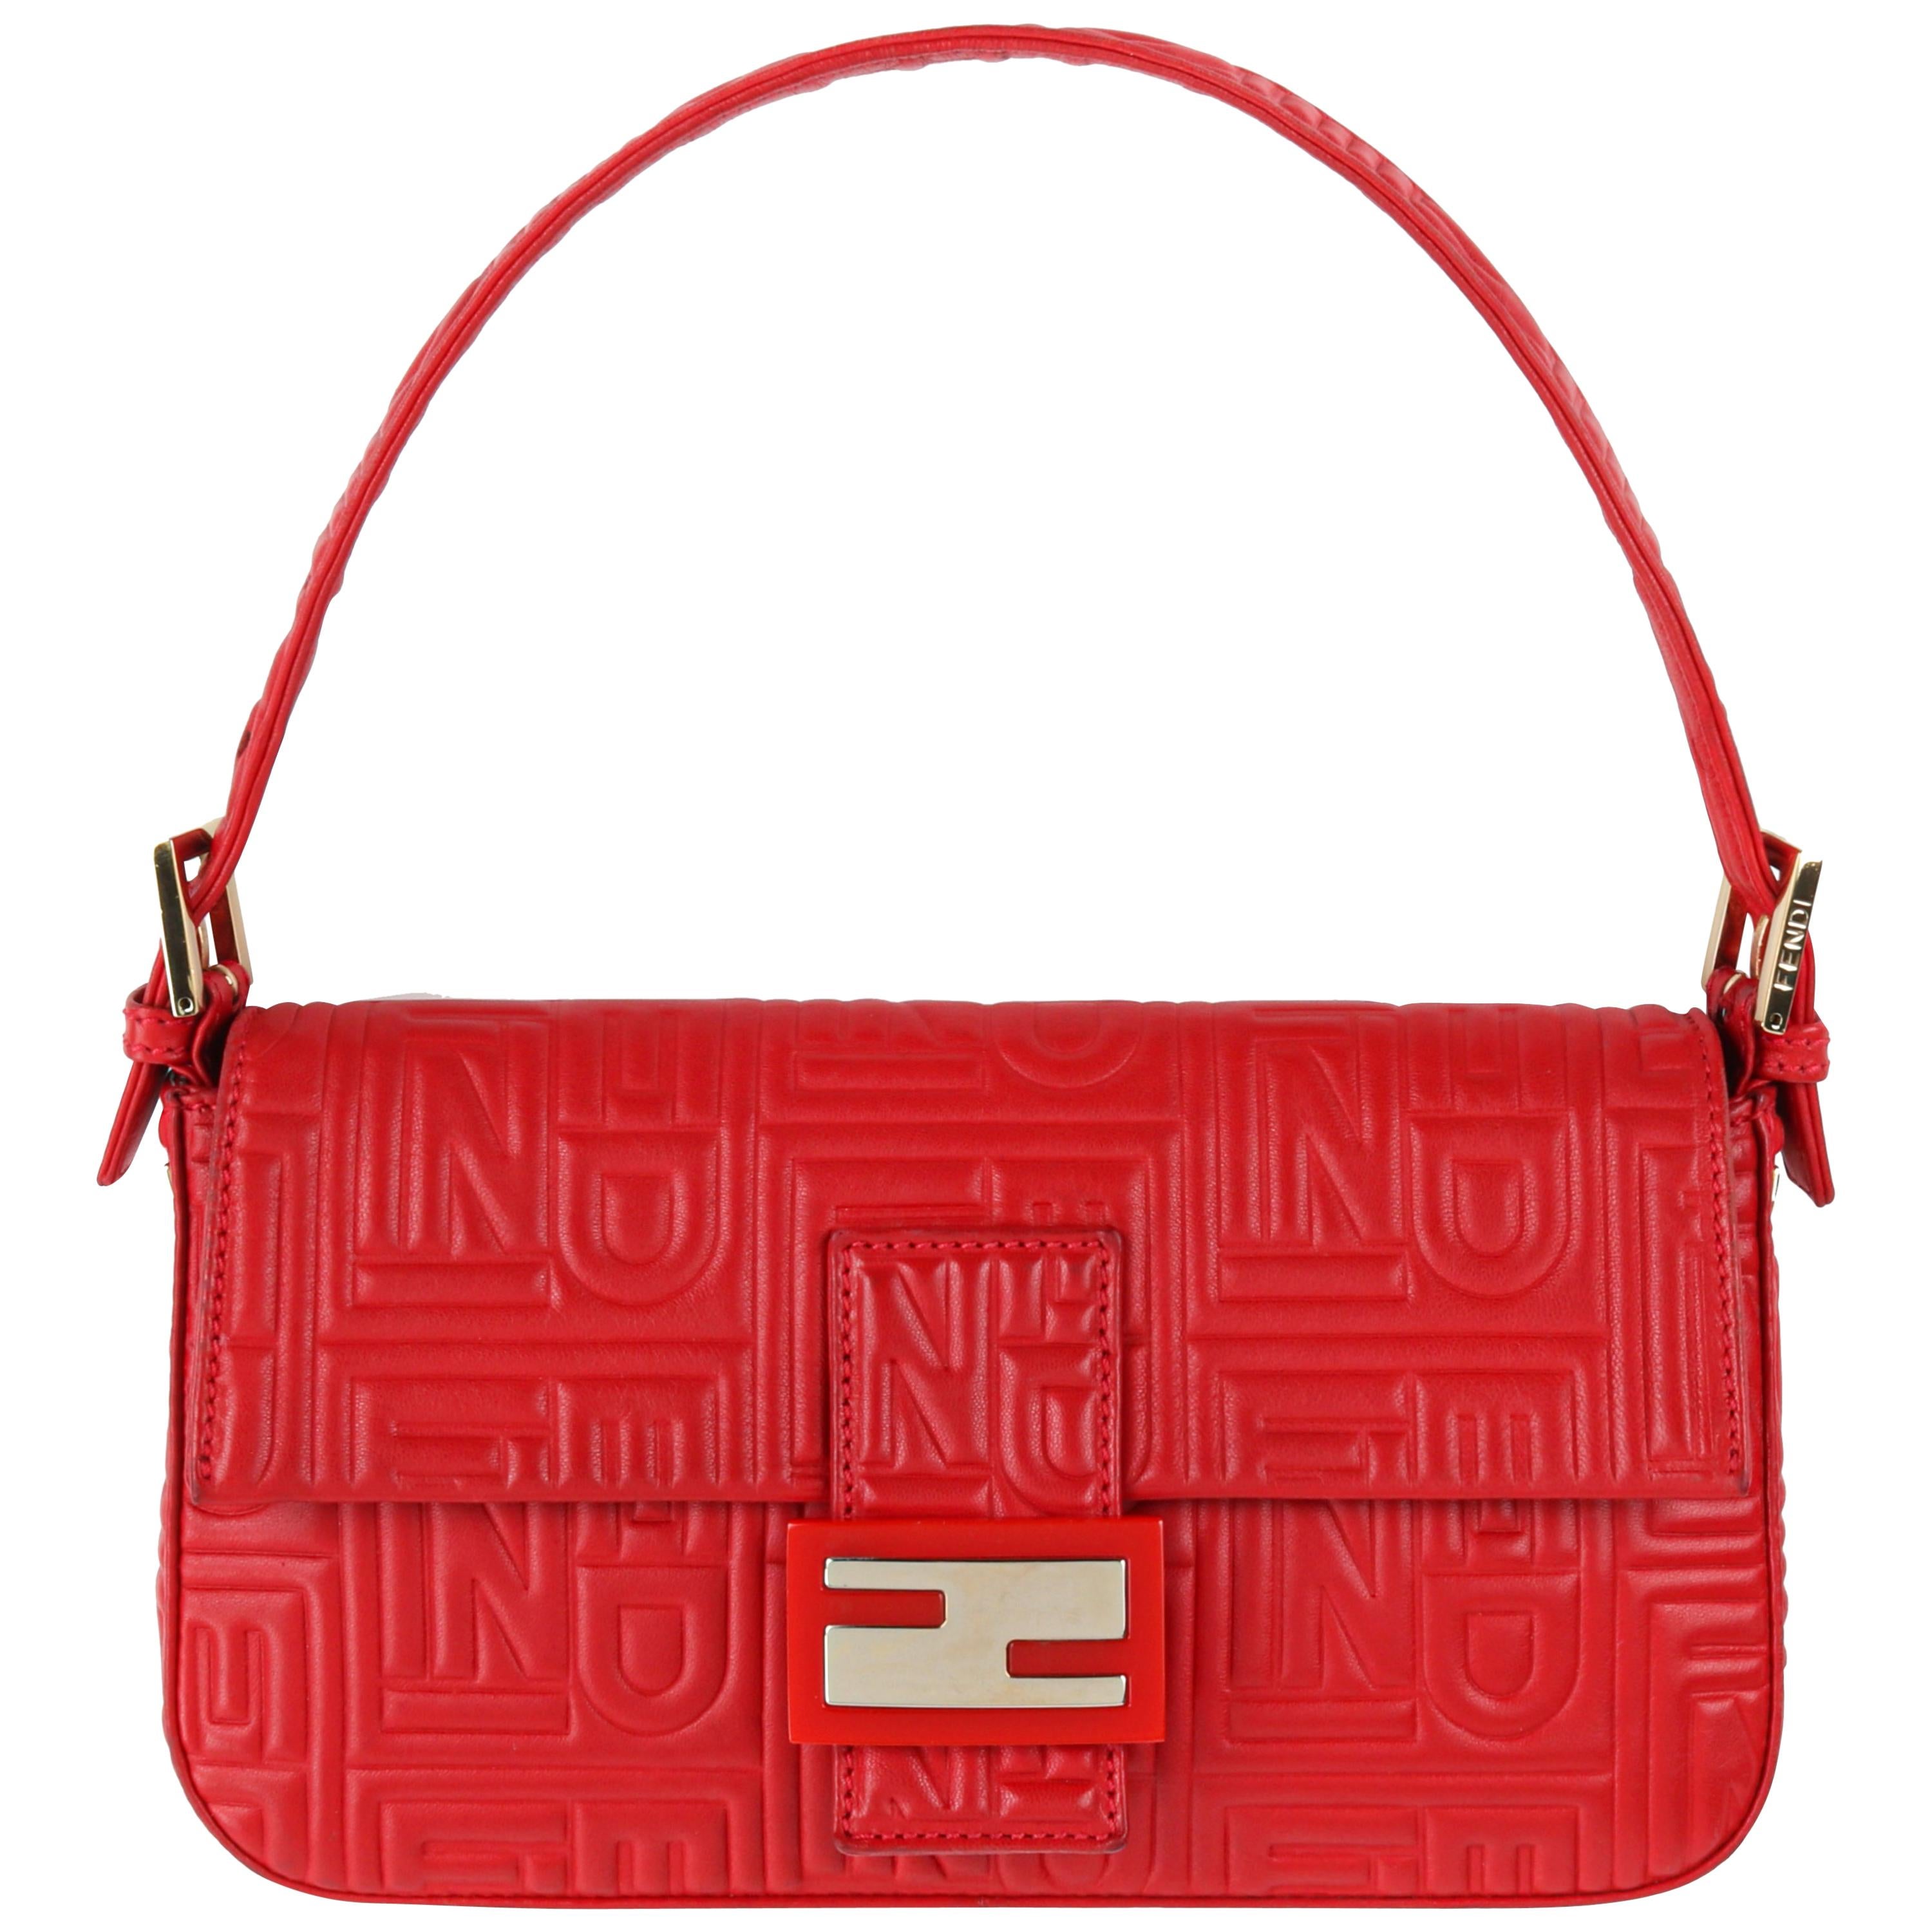 FENDI “Baguette” Red Gold Nappa Leather Quilted Embossed Logo Flap Top Handbag